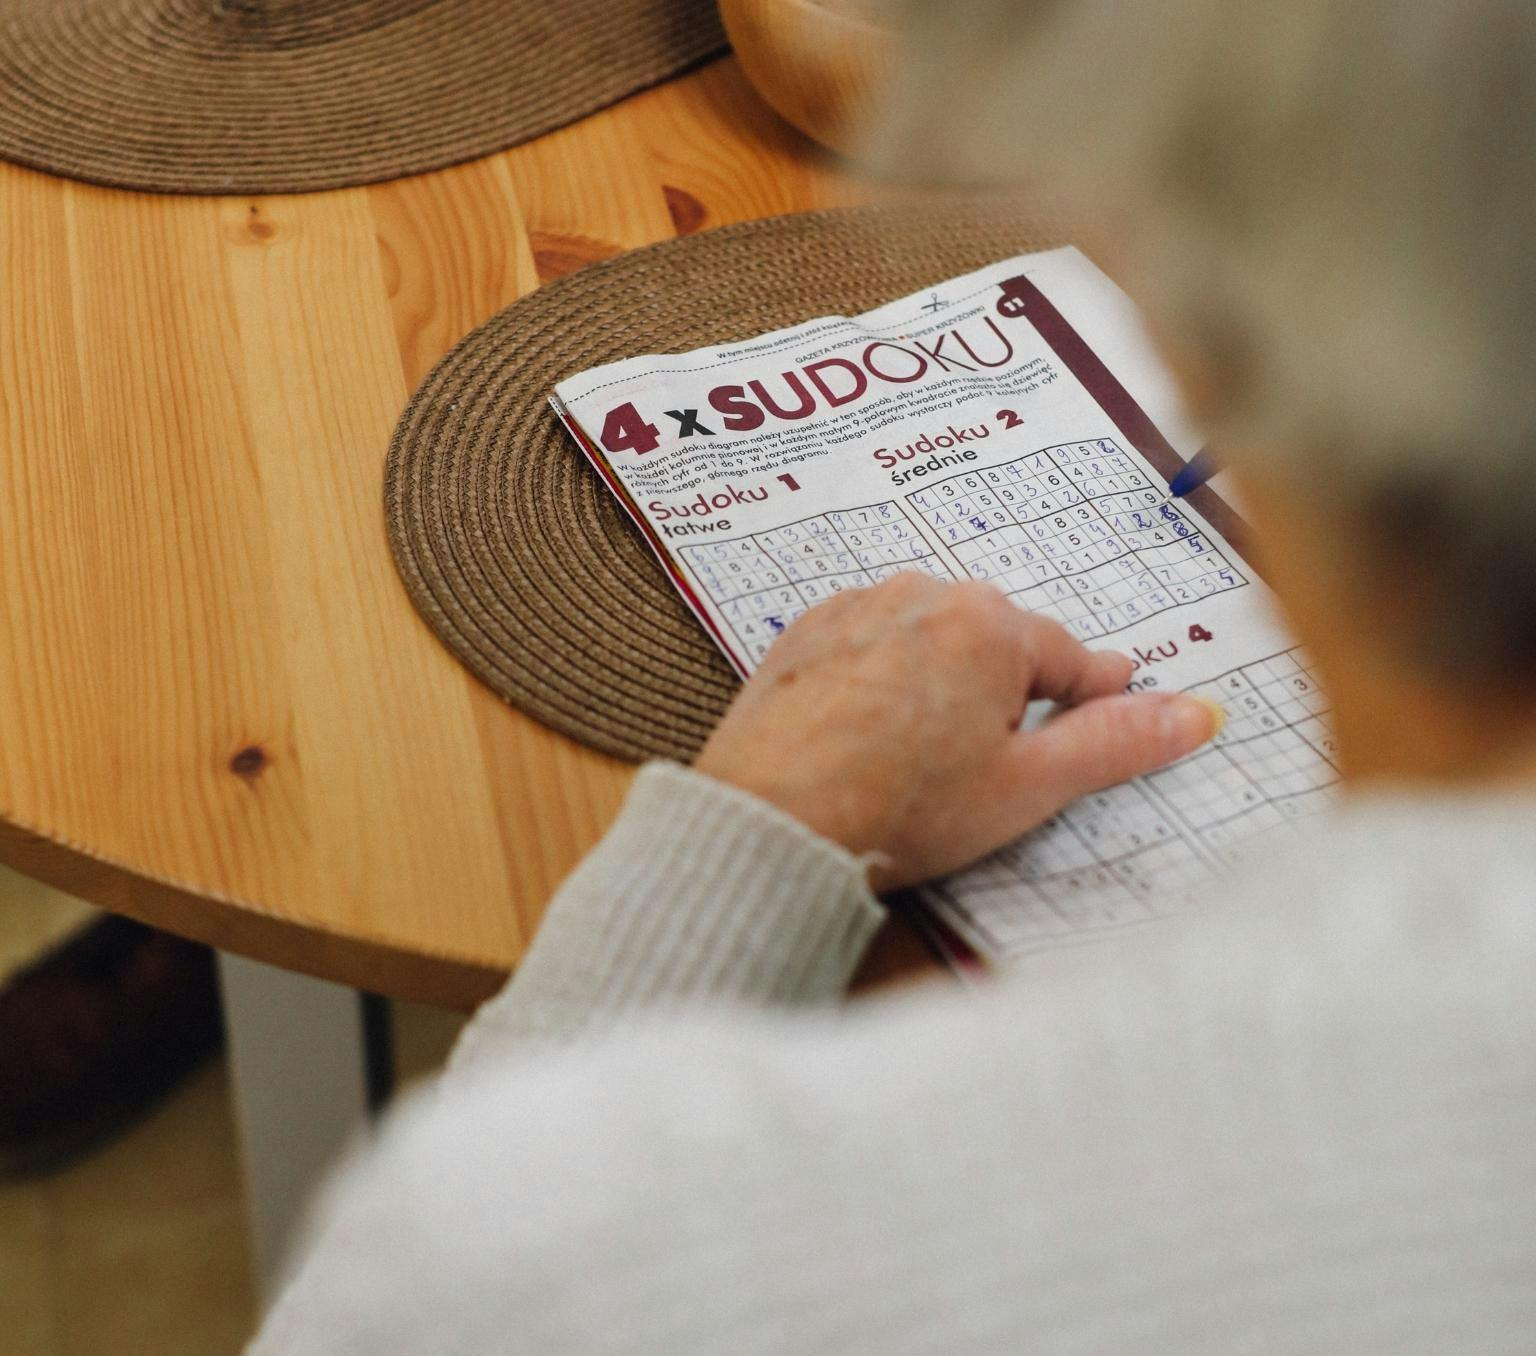 older woman's hands are in view completing a sudoku puzzle